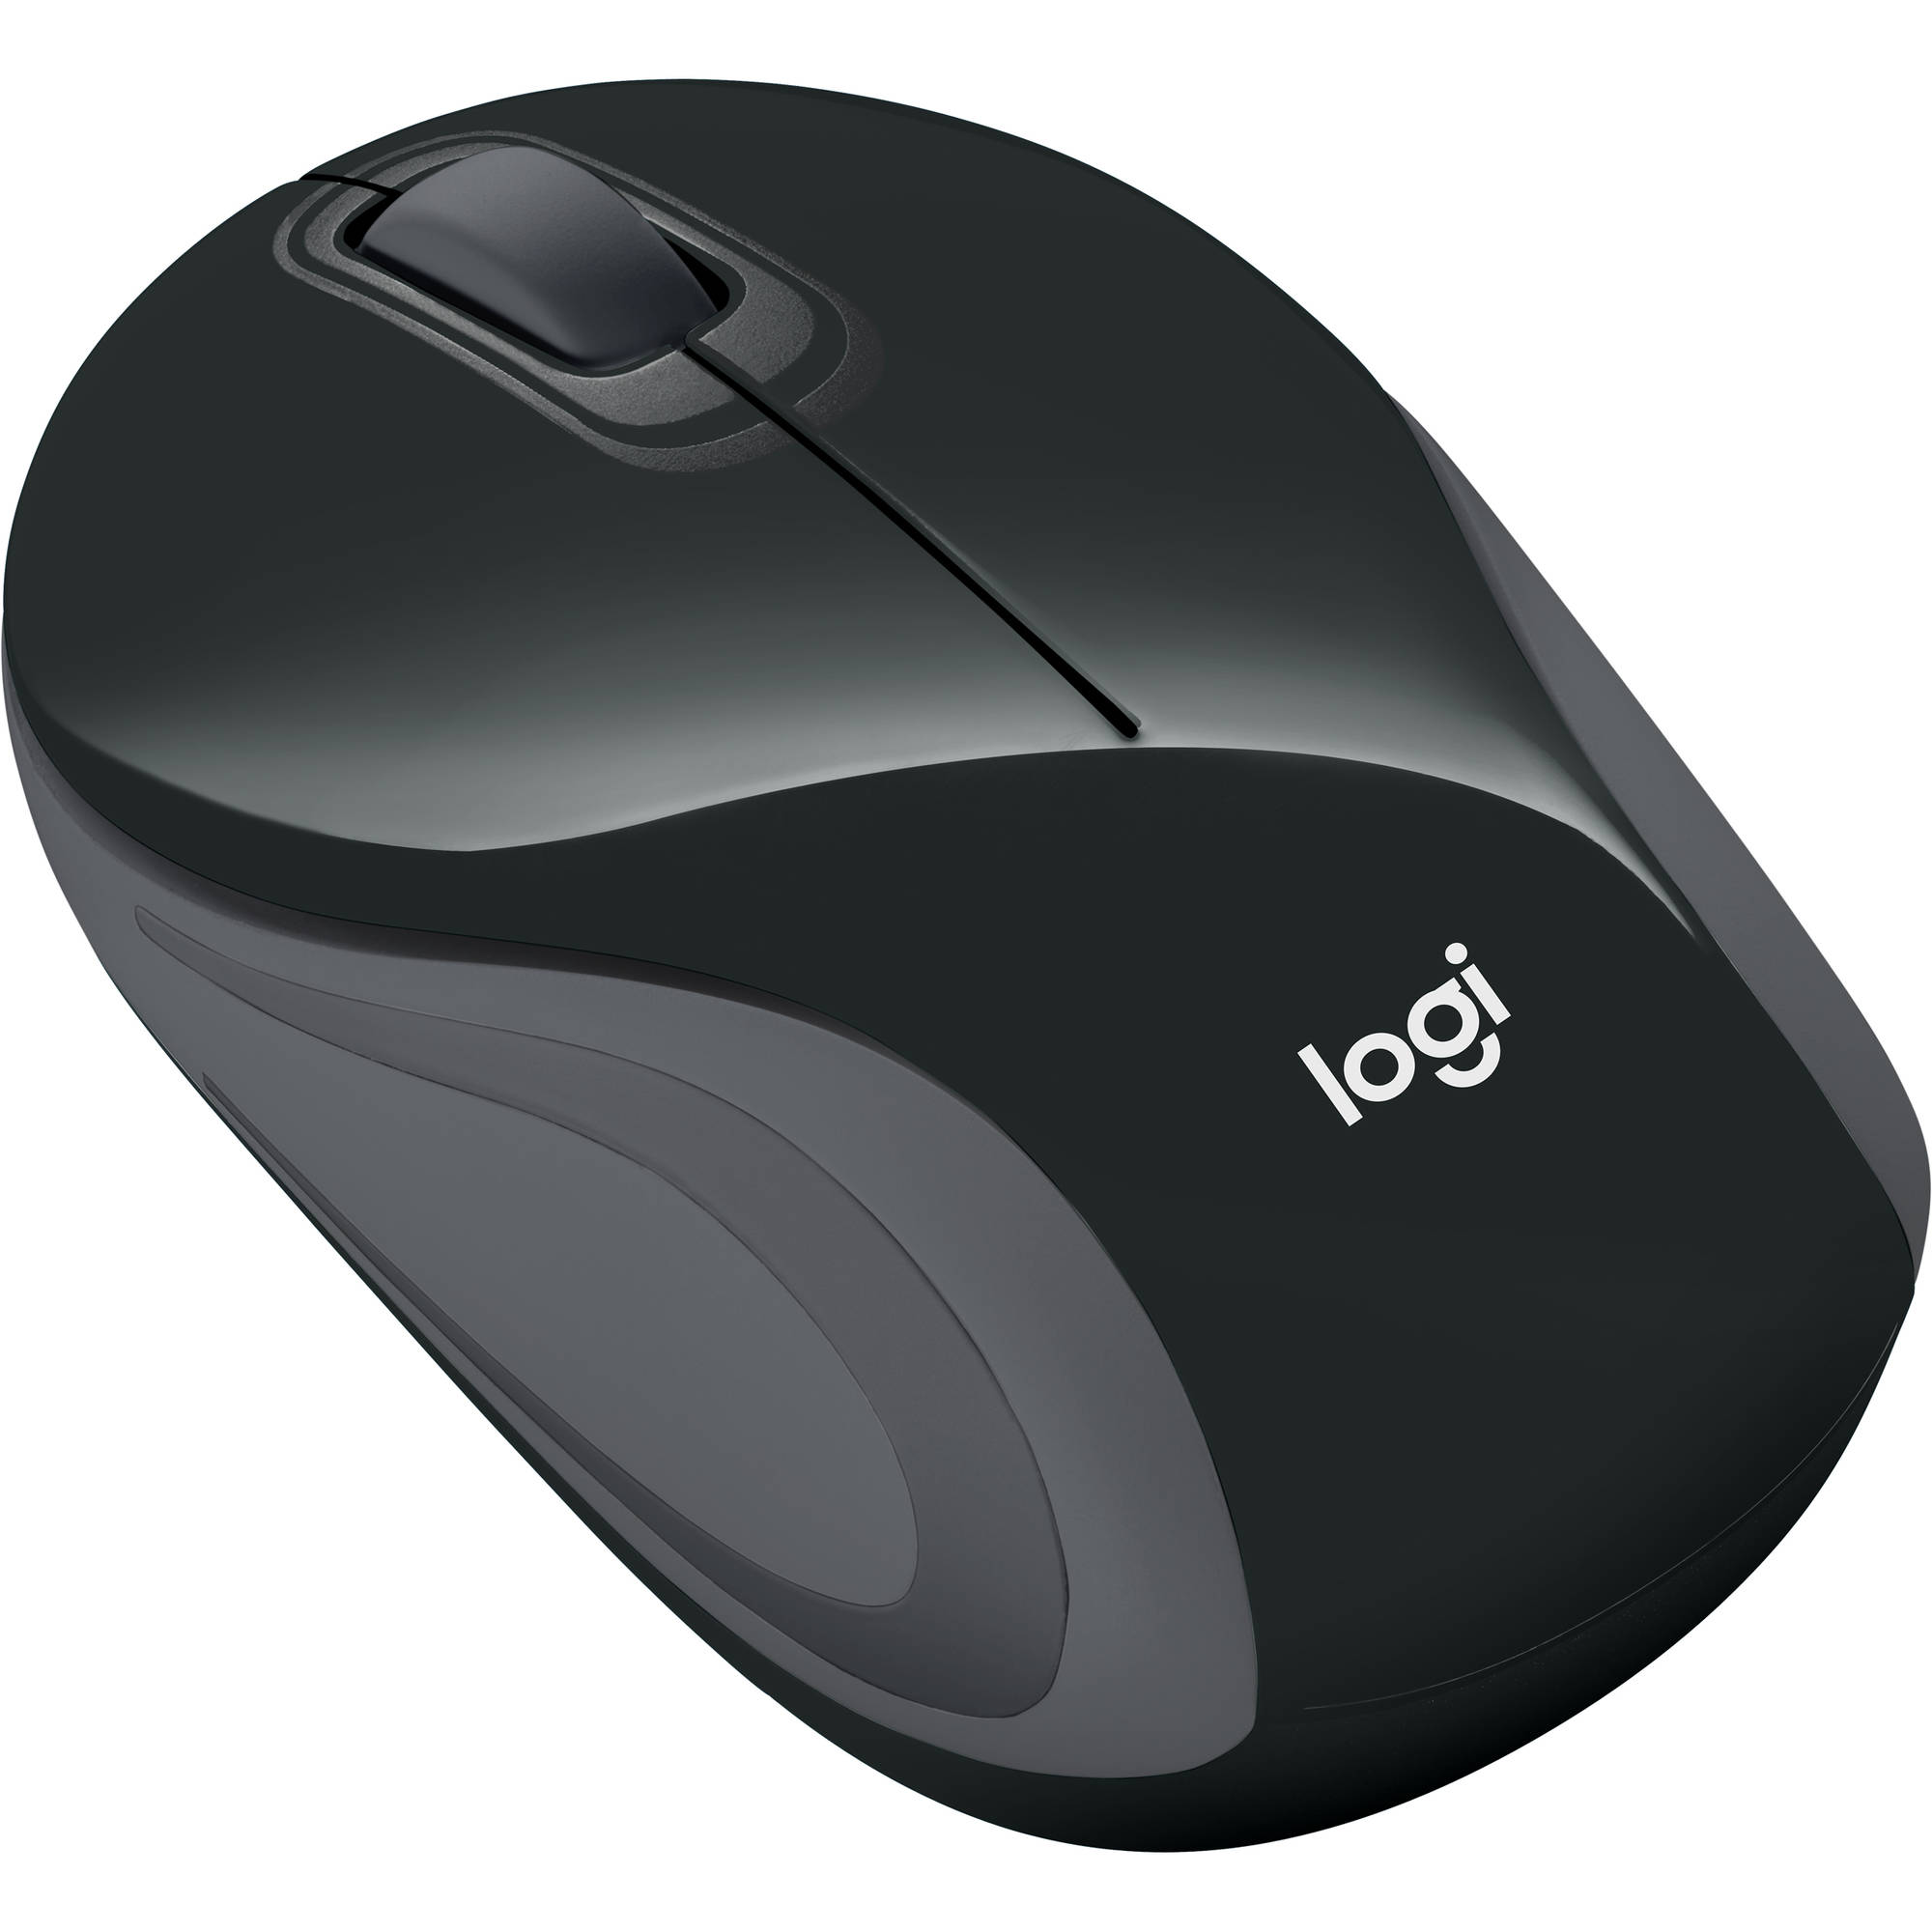 Deluxe mouse driver for mac